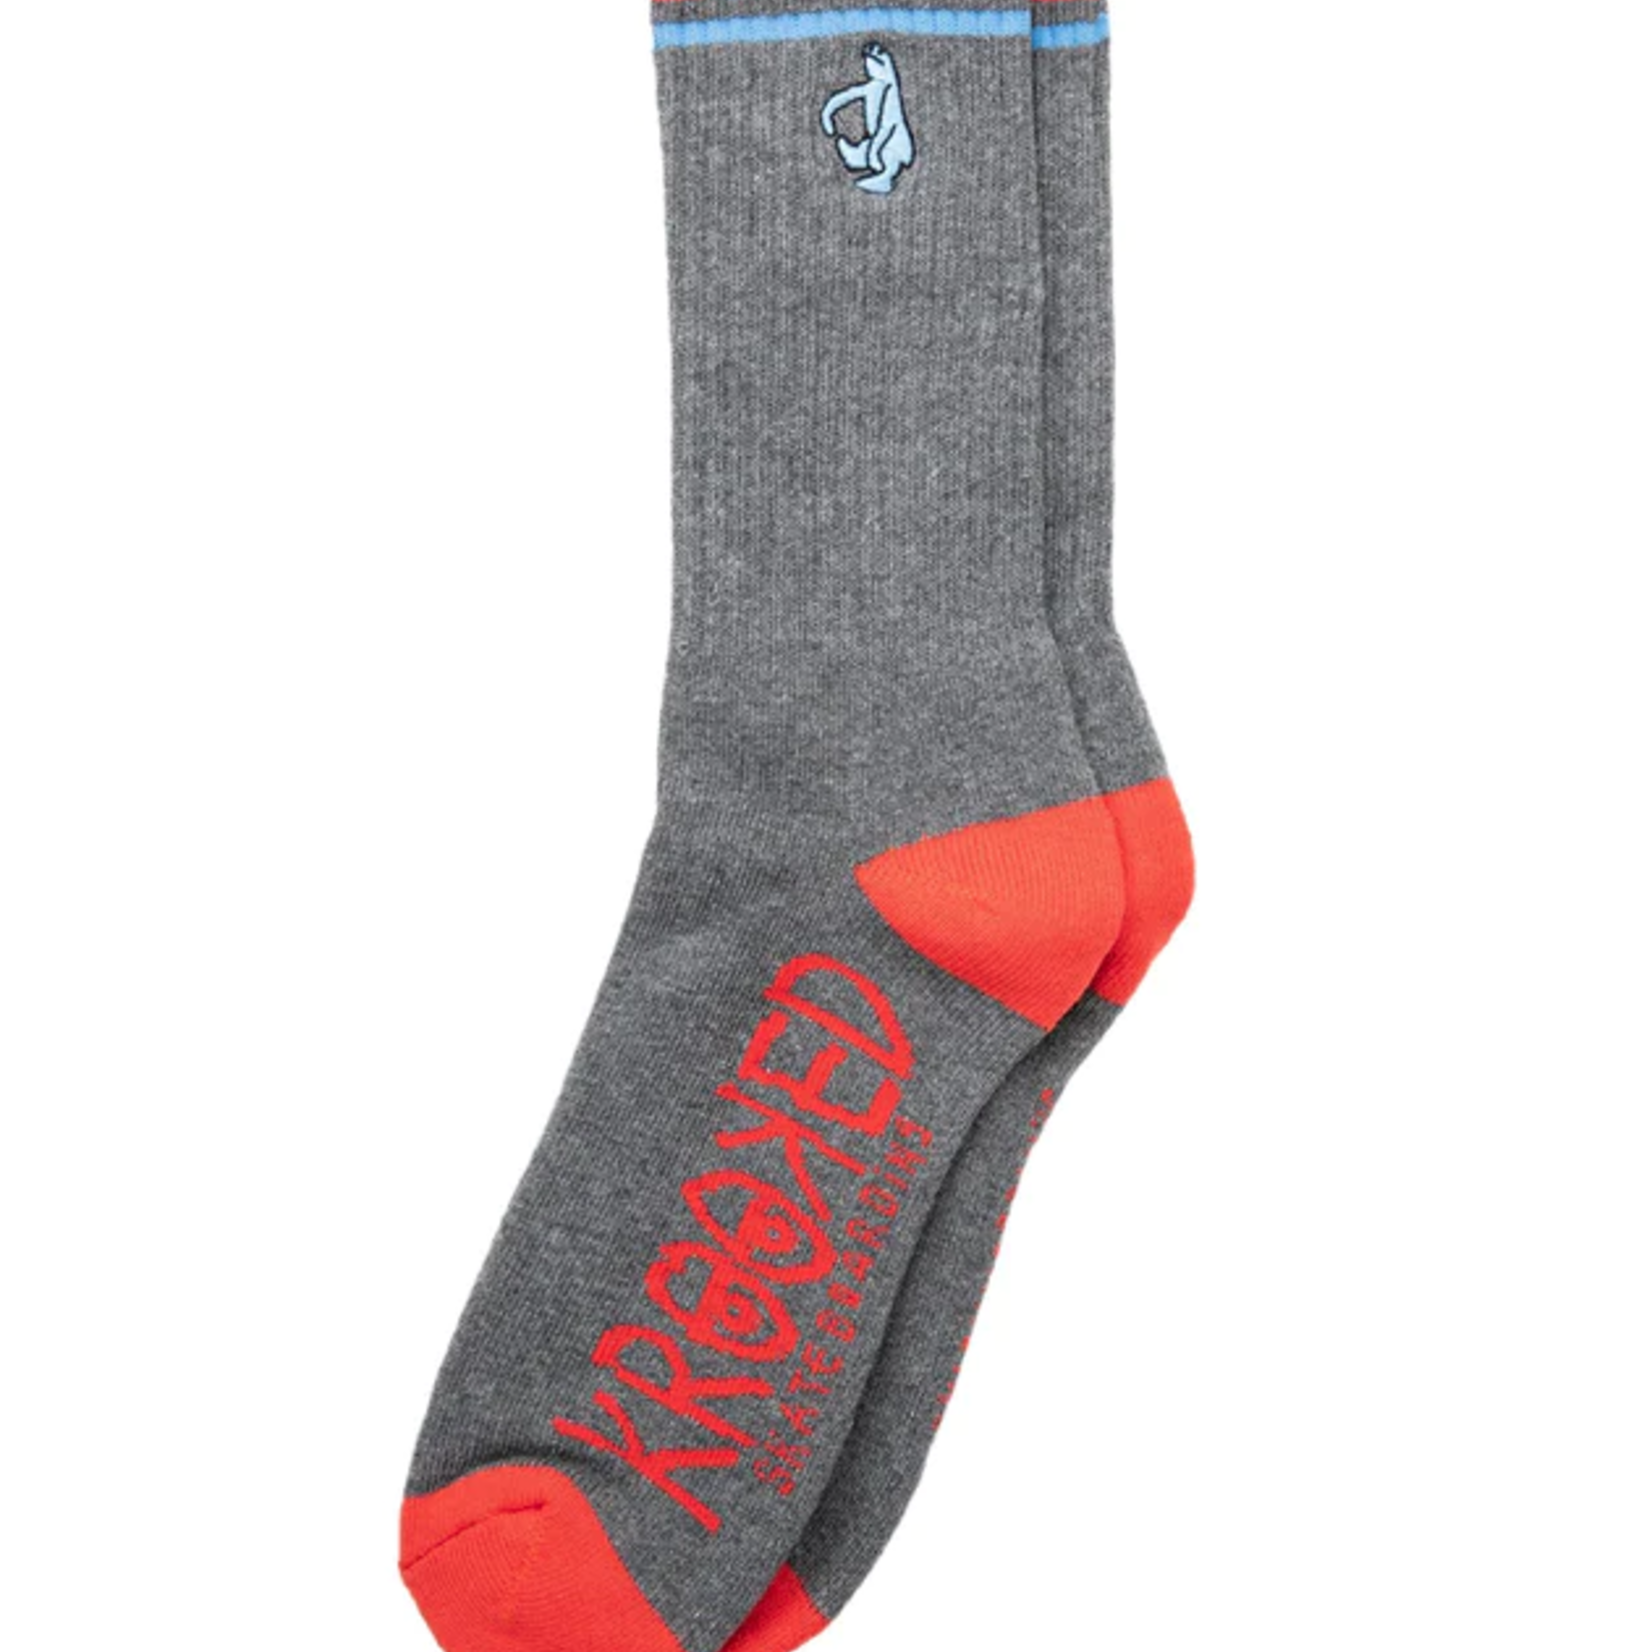 Krooked Krooked Shmoo Socks - Charcoal/Blue/Red